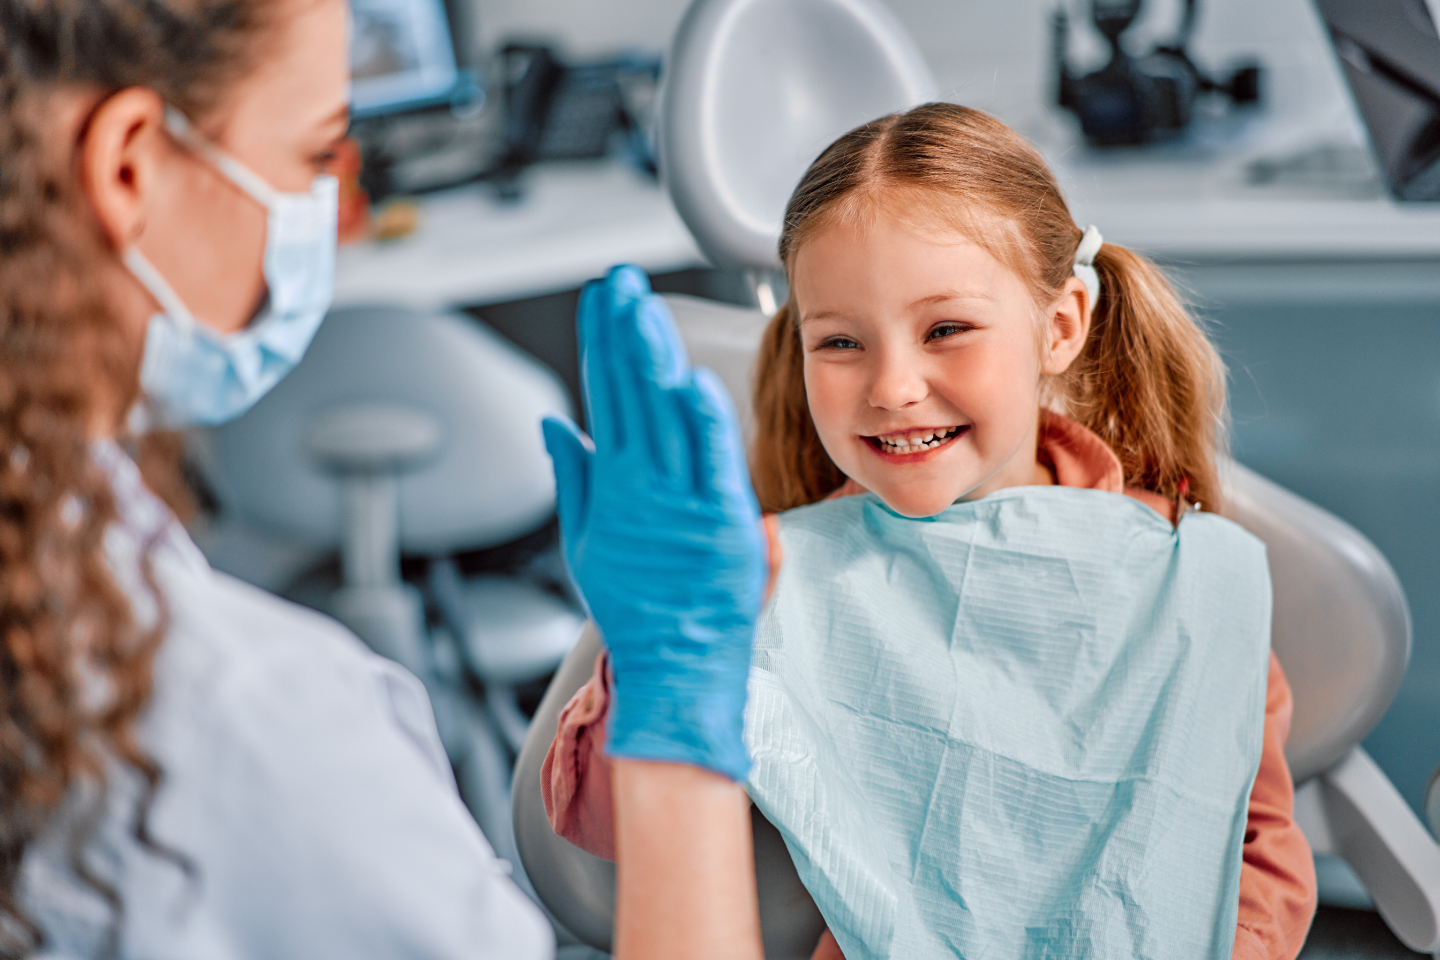 How to Explain A First Dental Visit To Your Child